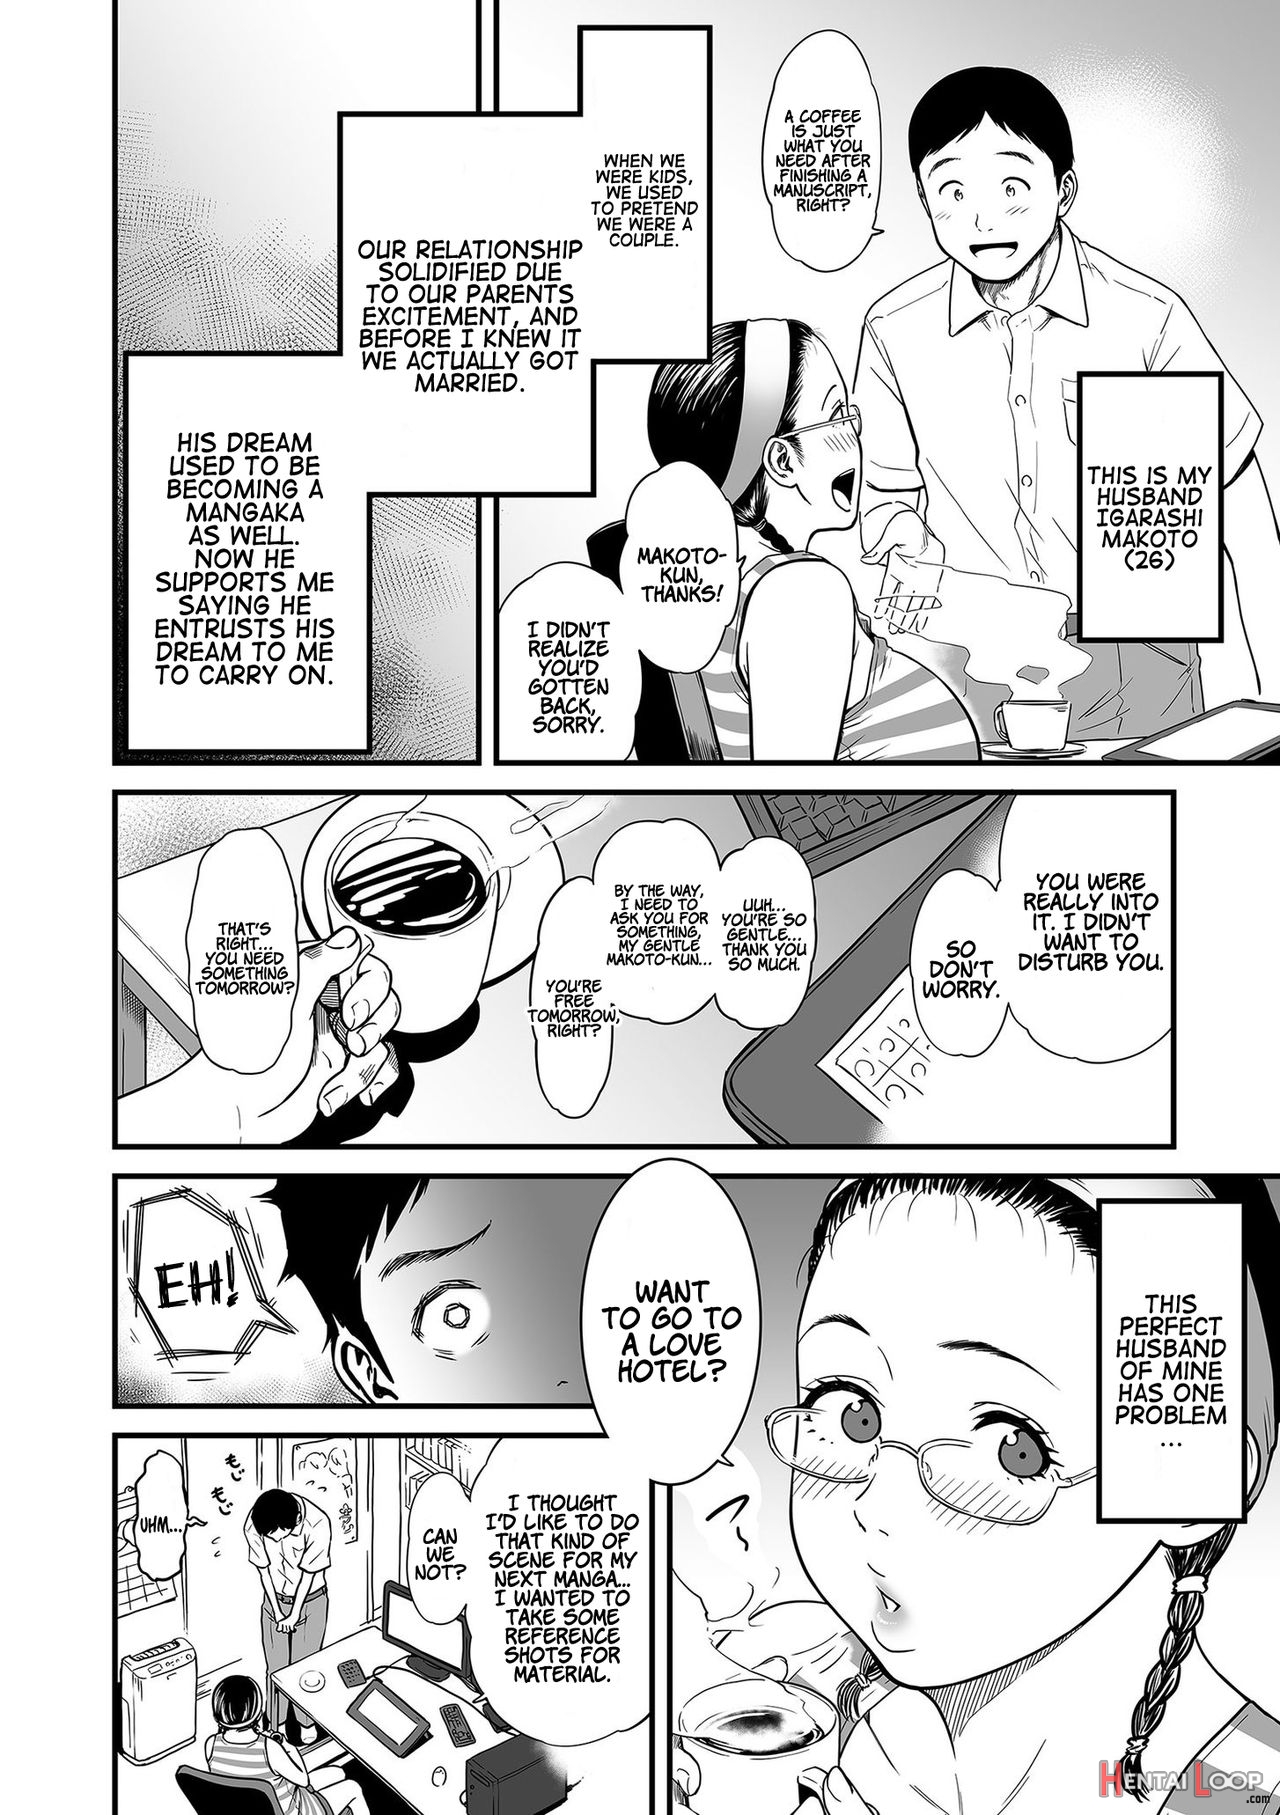 Is It Not A Fantasy That The Female Erotic Mangaka Is A Pervert? 1-7 page 10